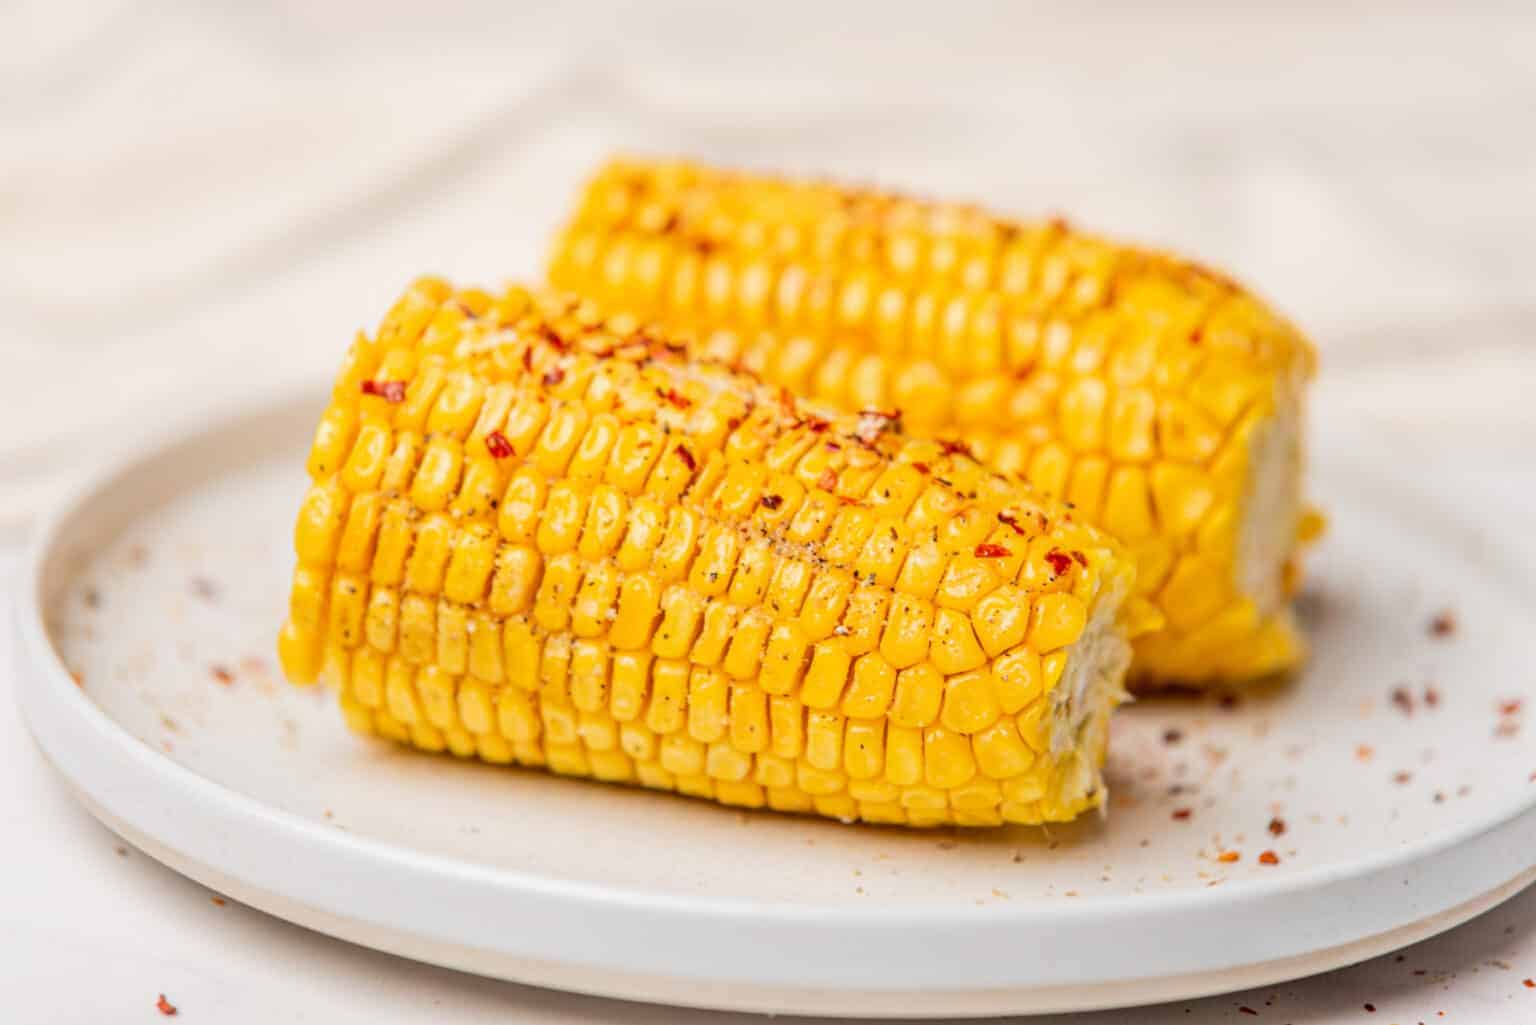 An image of a halved corn on a plate topped with chili flakes.